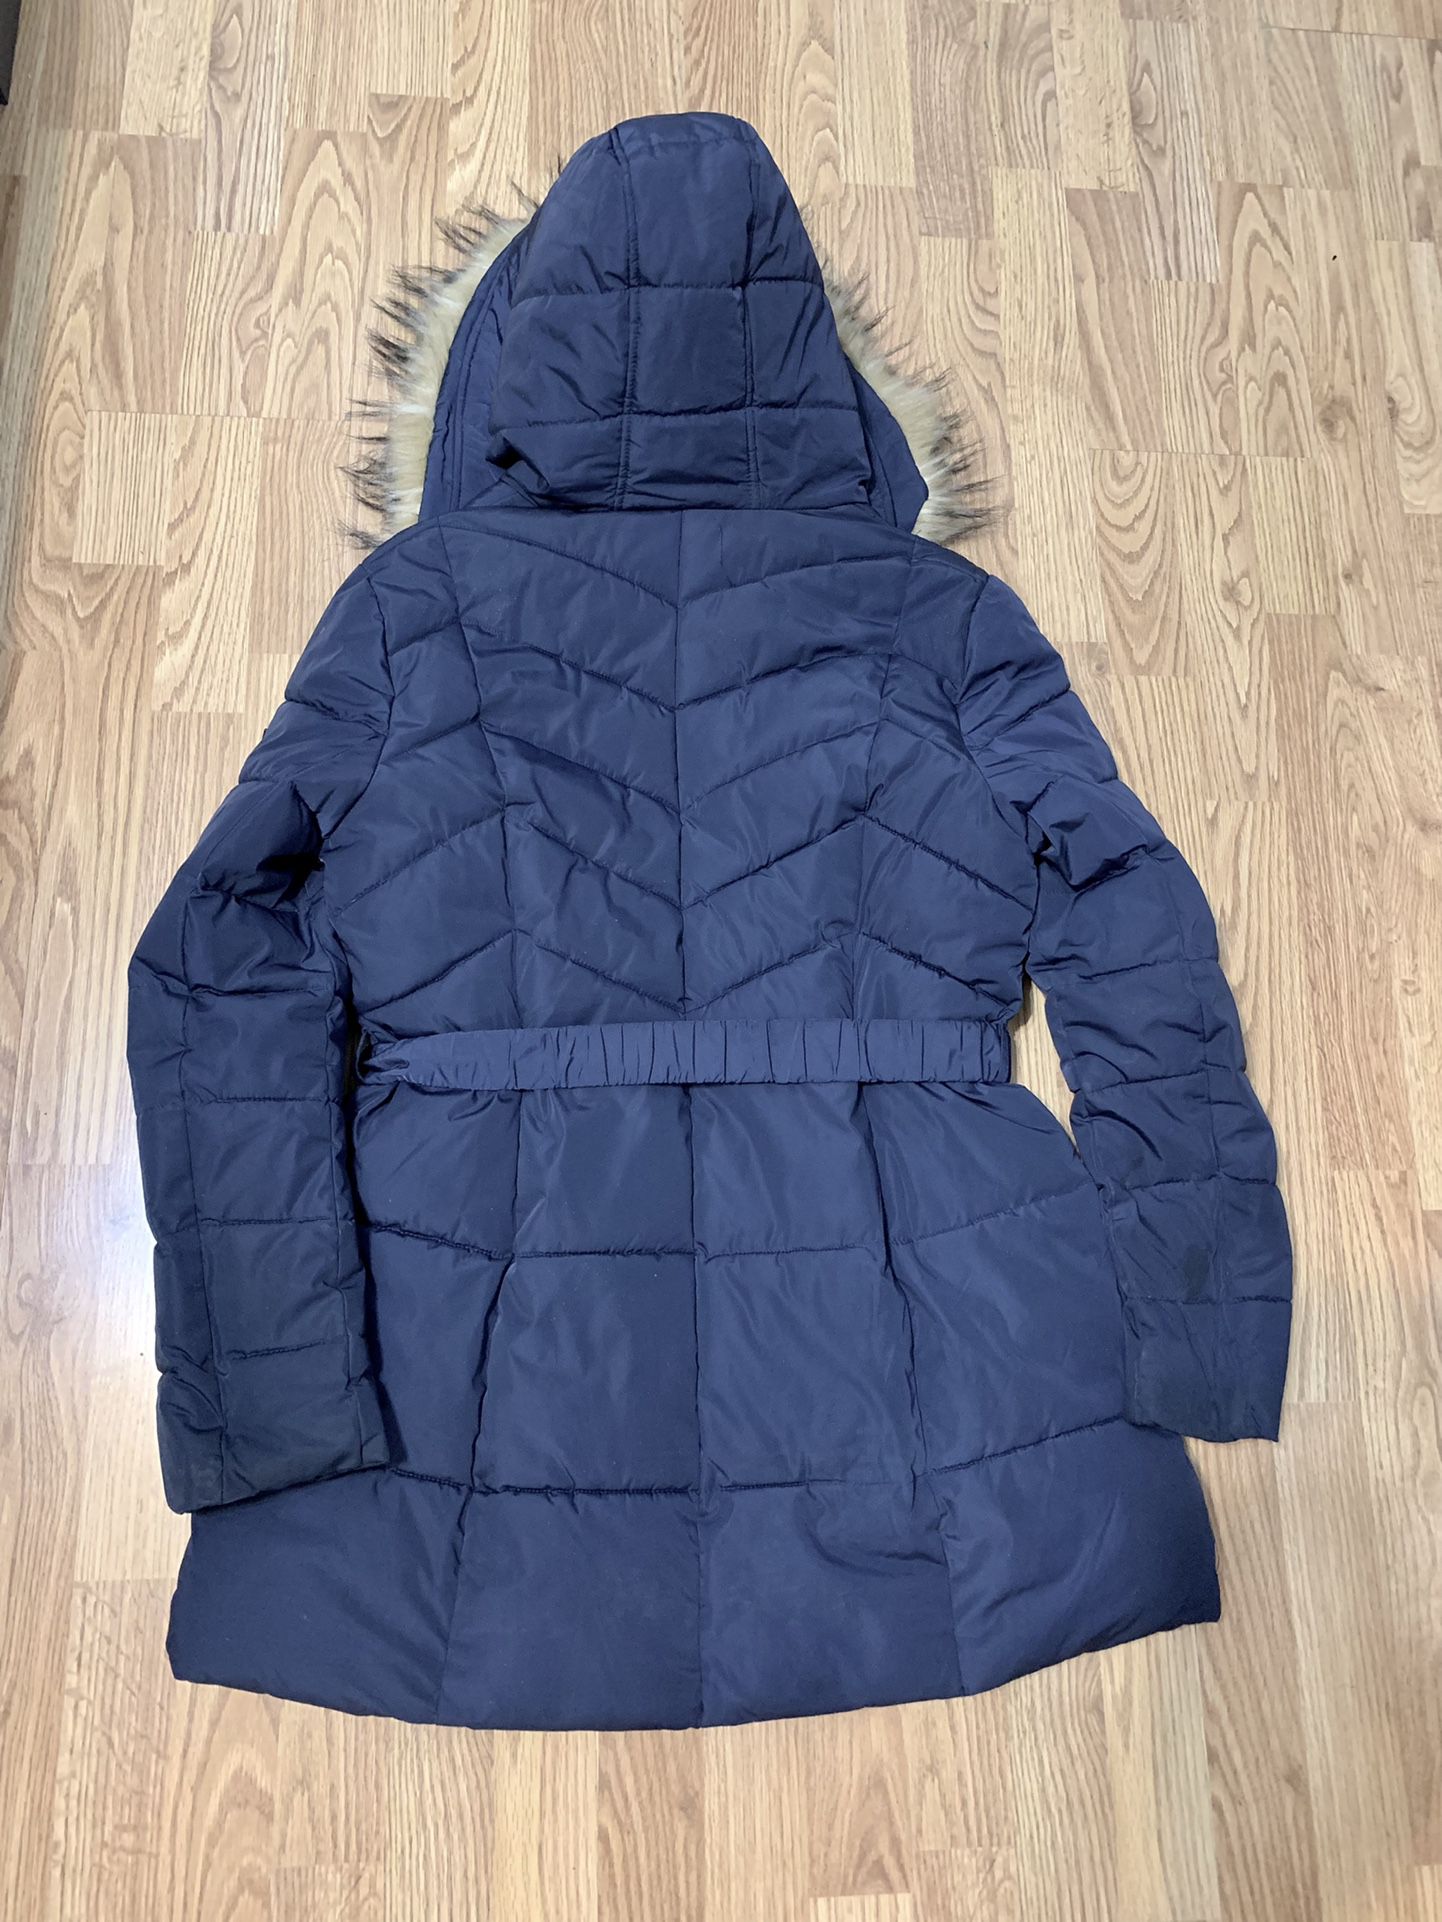 Guess Down Filled parka Fur Hooded puffer coat Blue winter jacket Womens x-large